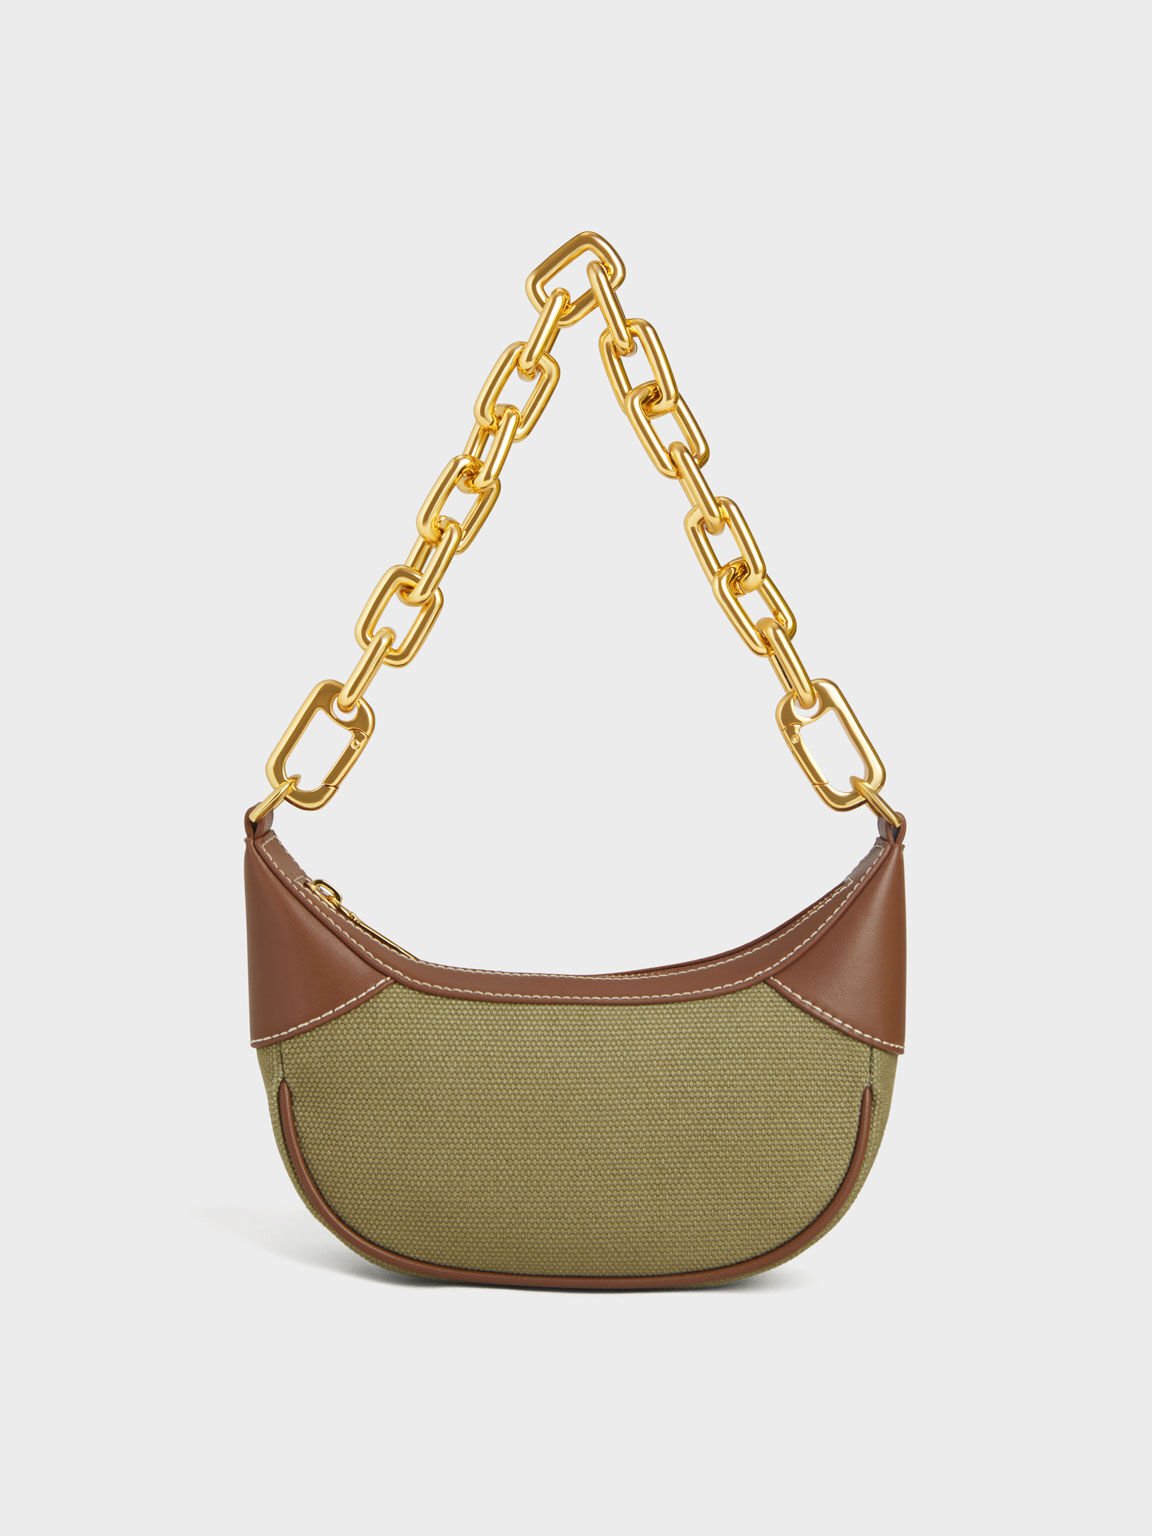 Women's Shoulder Bags | Exclusive Styles - CHARLES & KEITH US